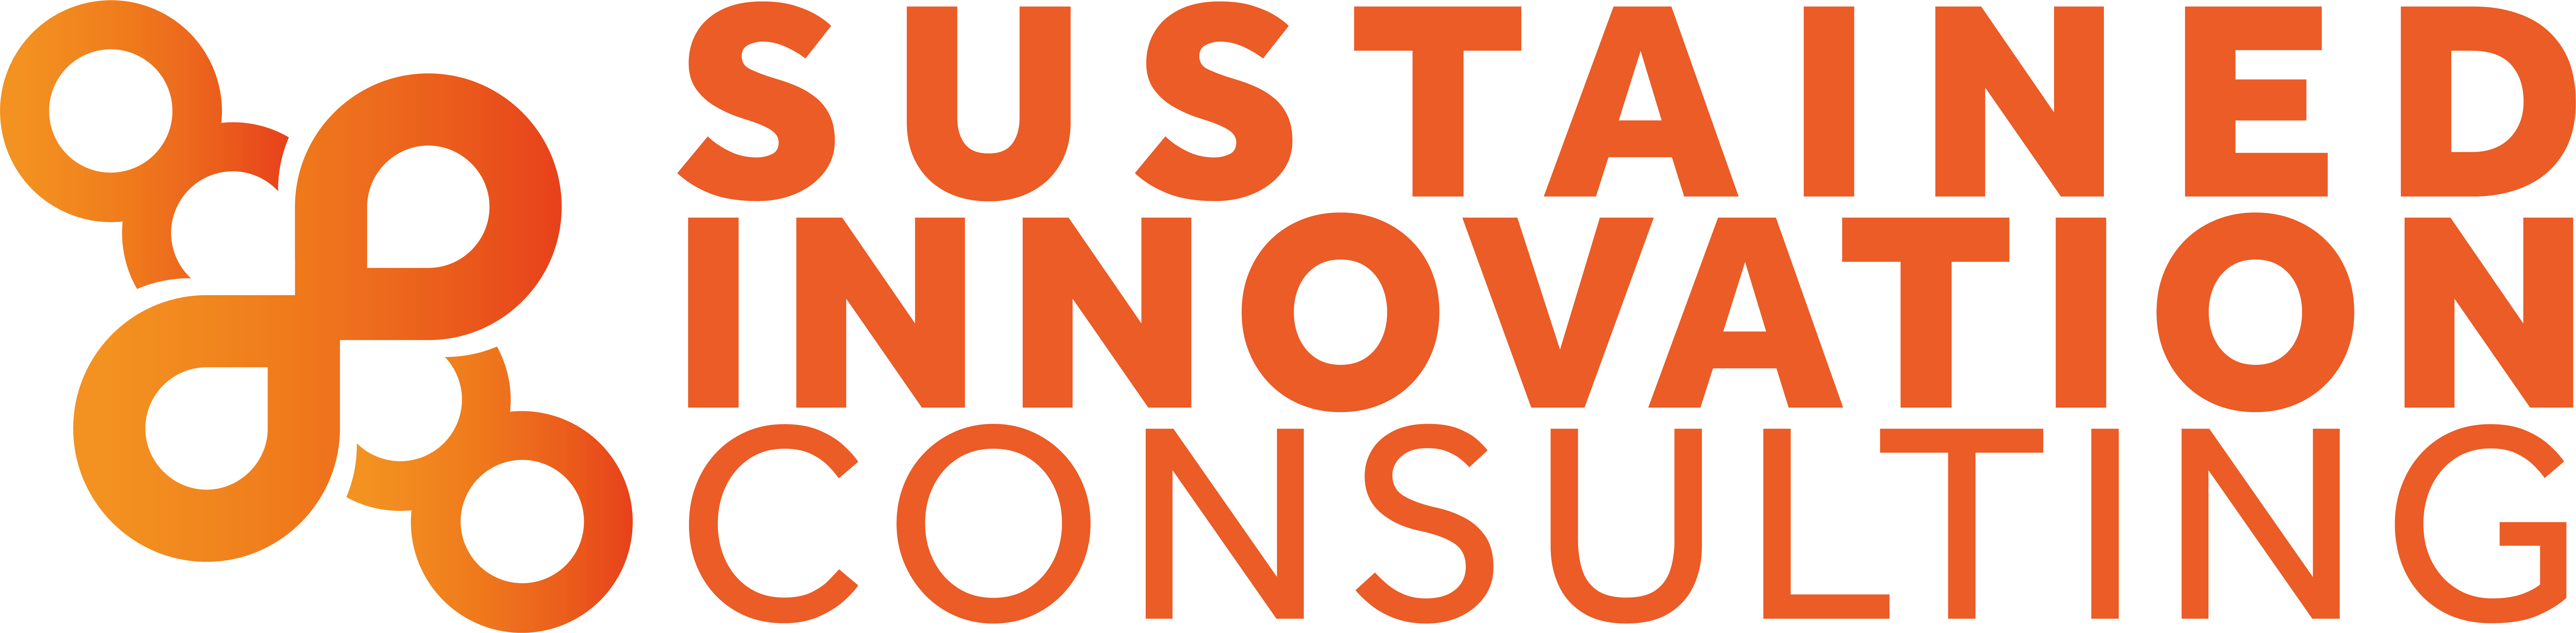 Sutained Innovation Consulting